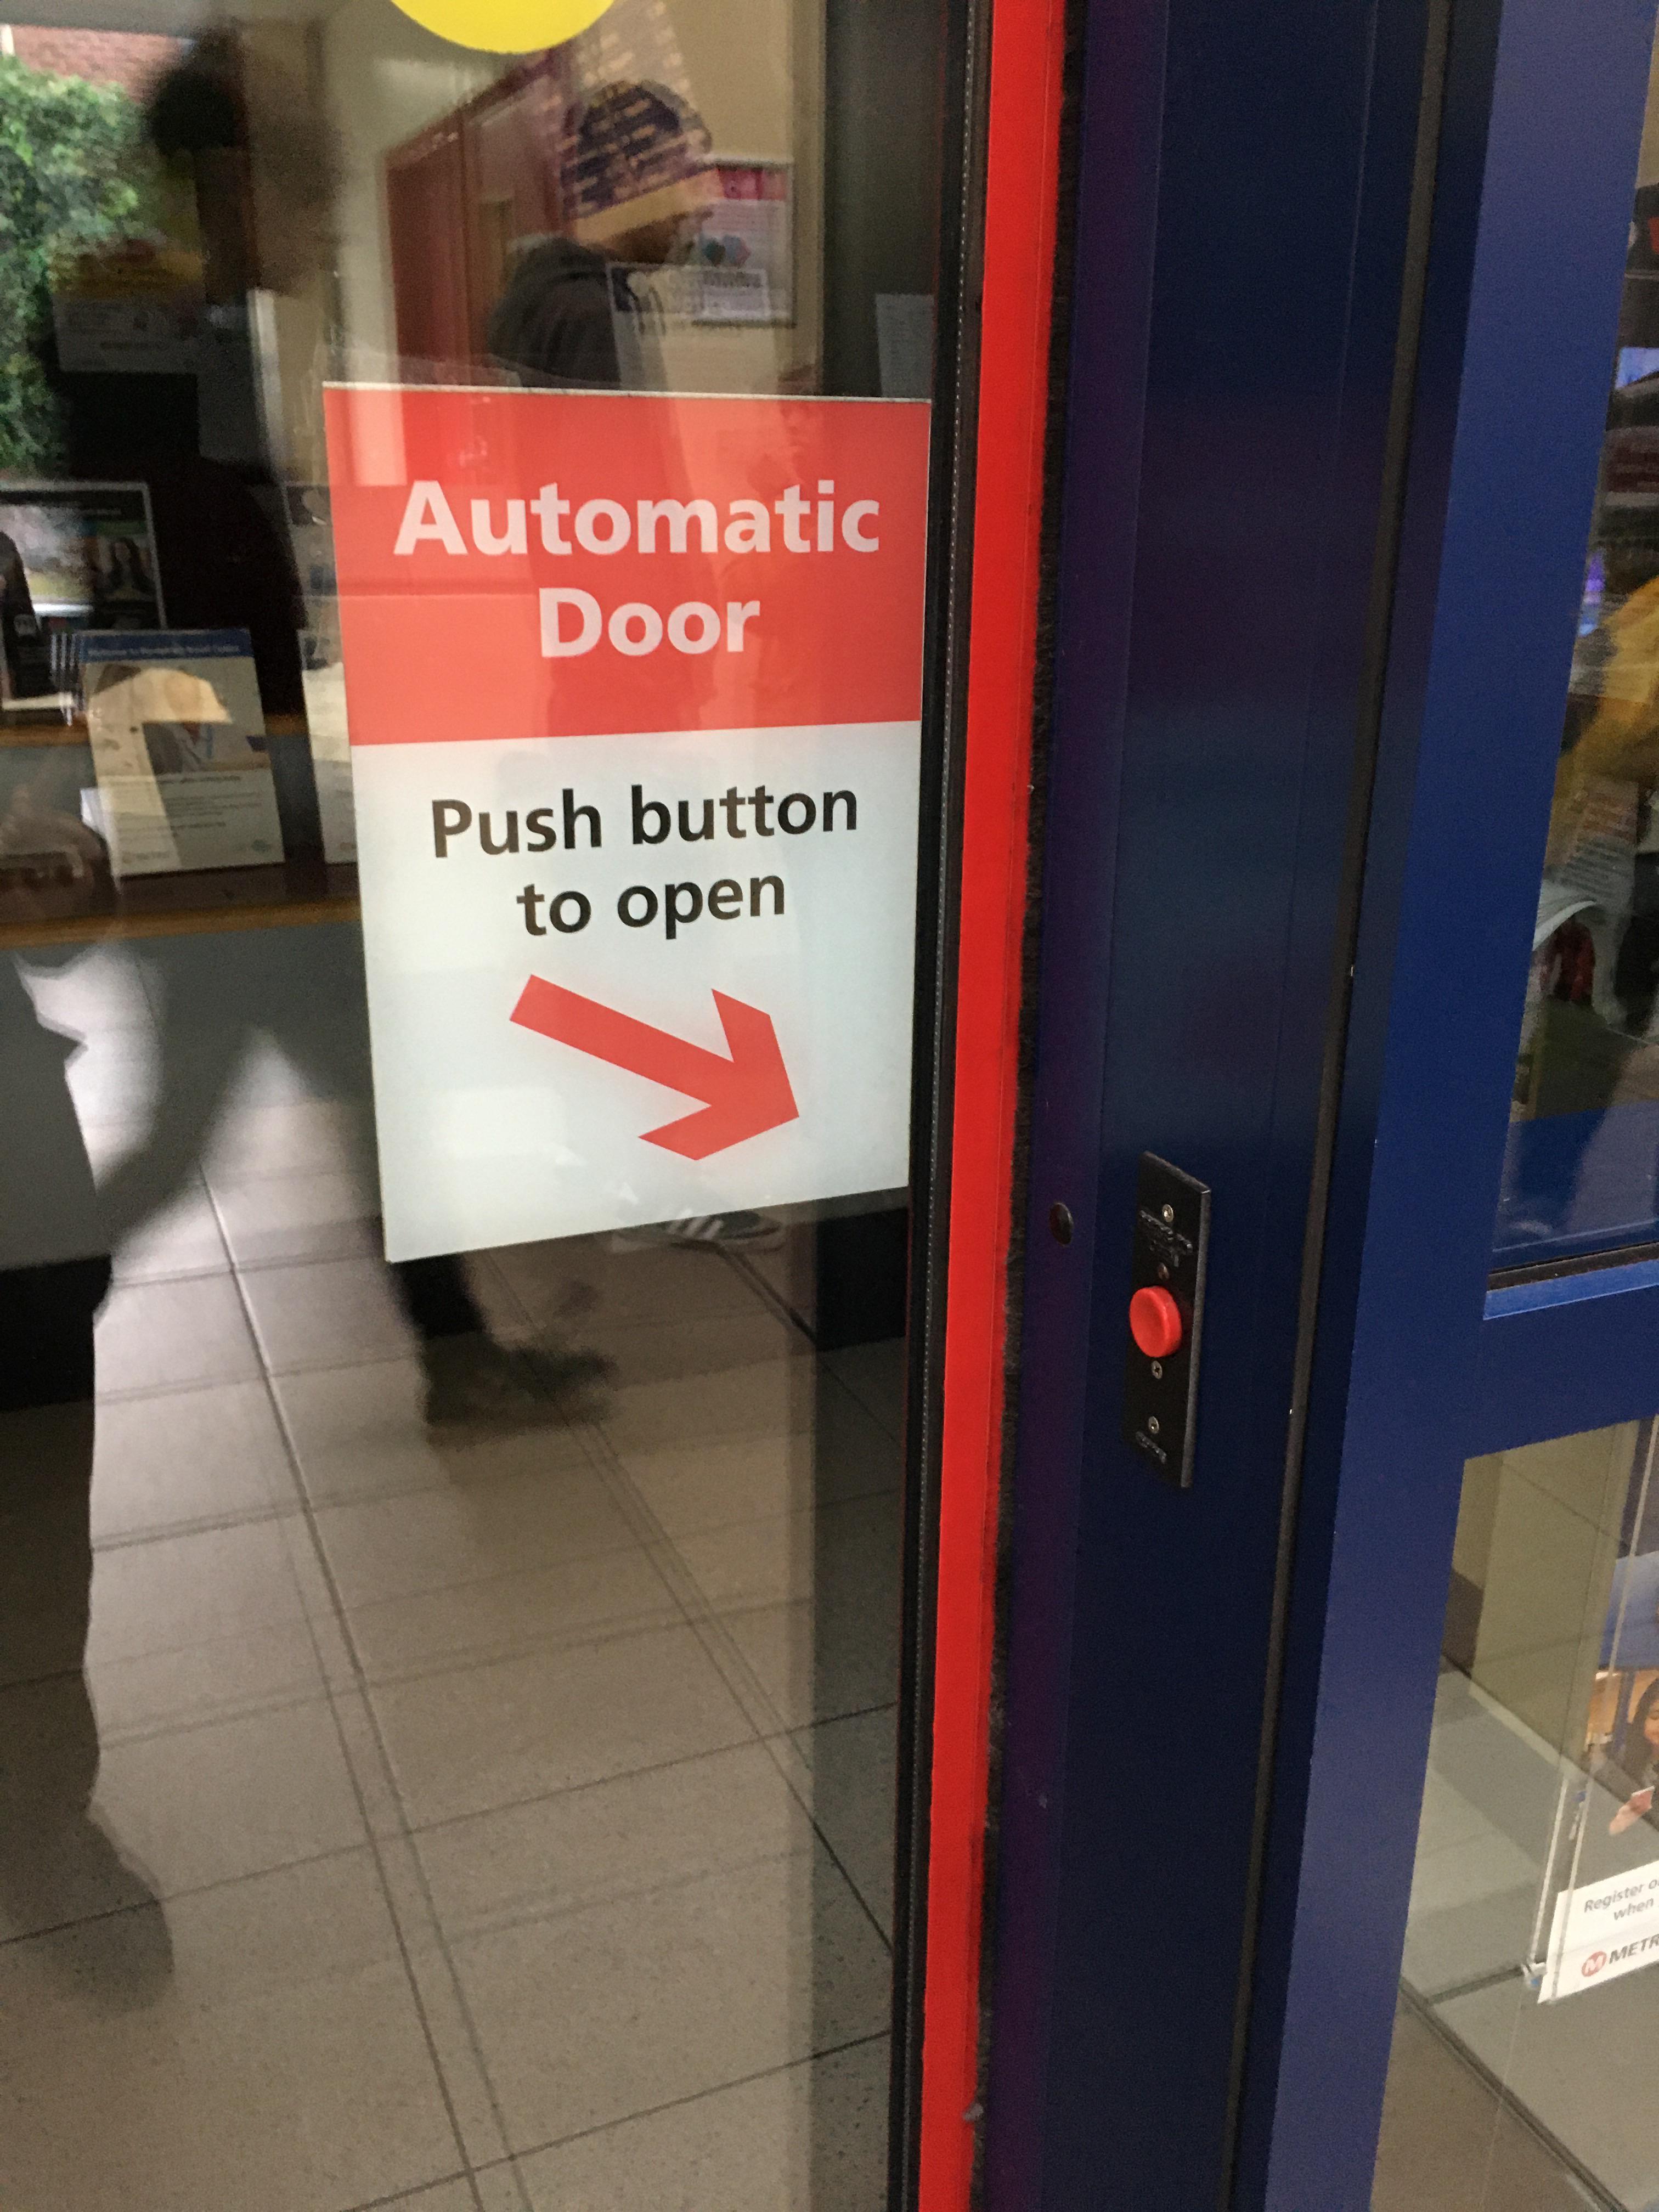 Automatic Door Push button to open